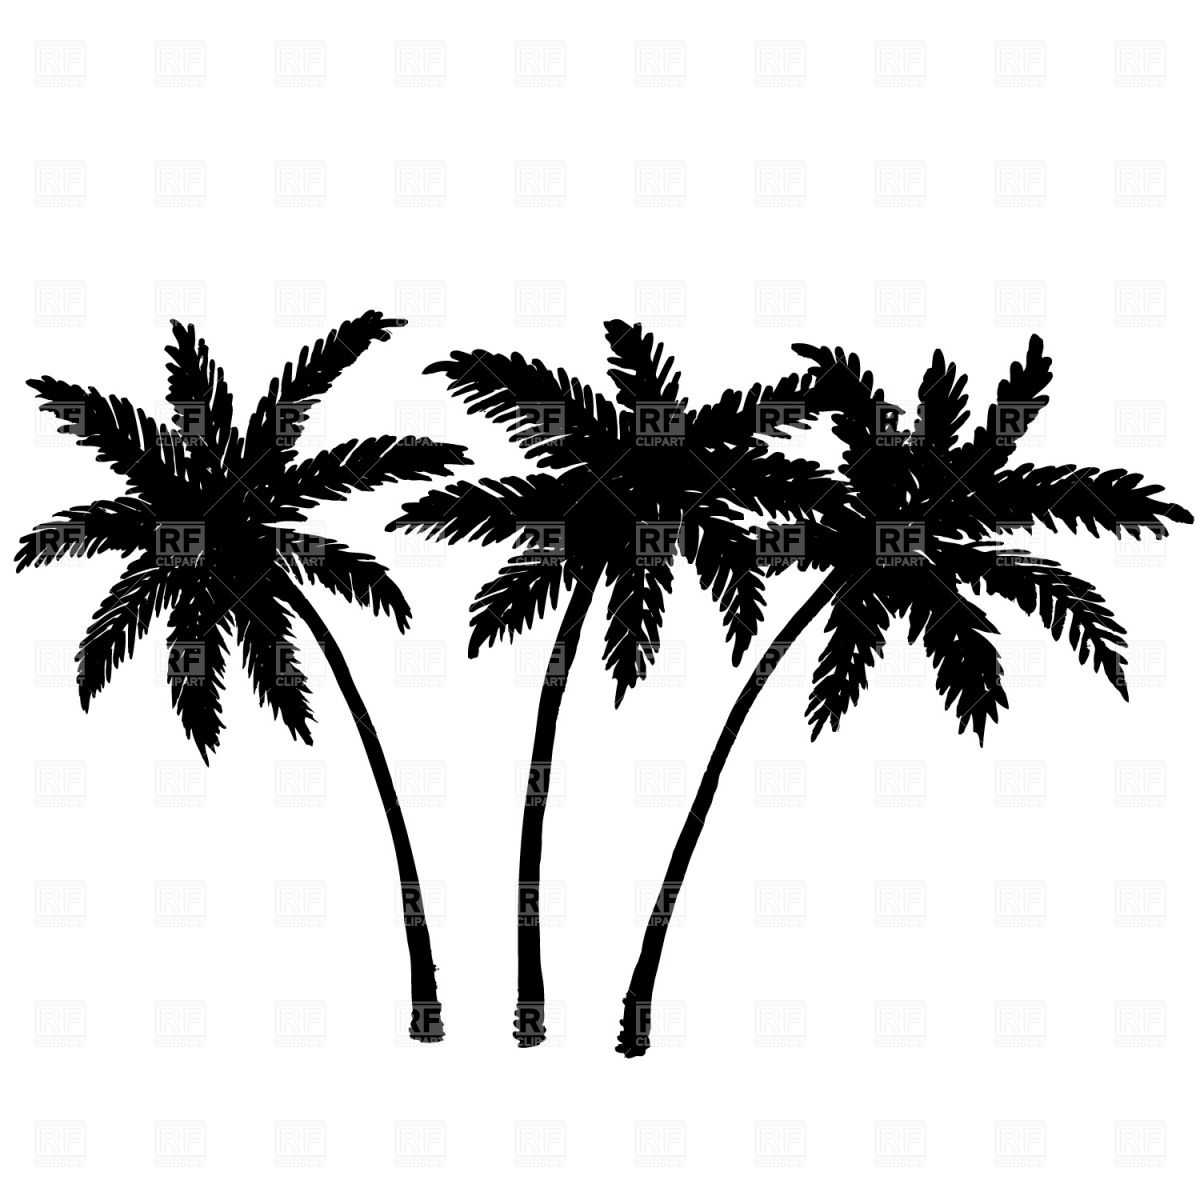 Three Palm Trees Silhouette 987 Silhouettes Outlines Download